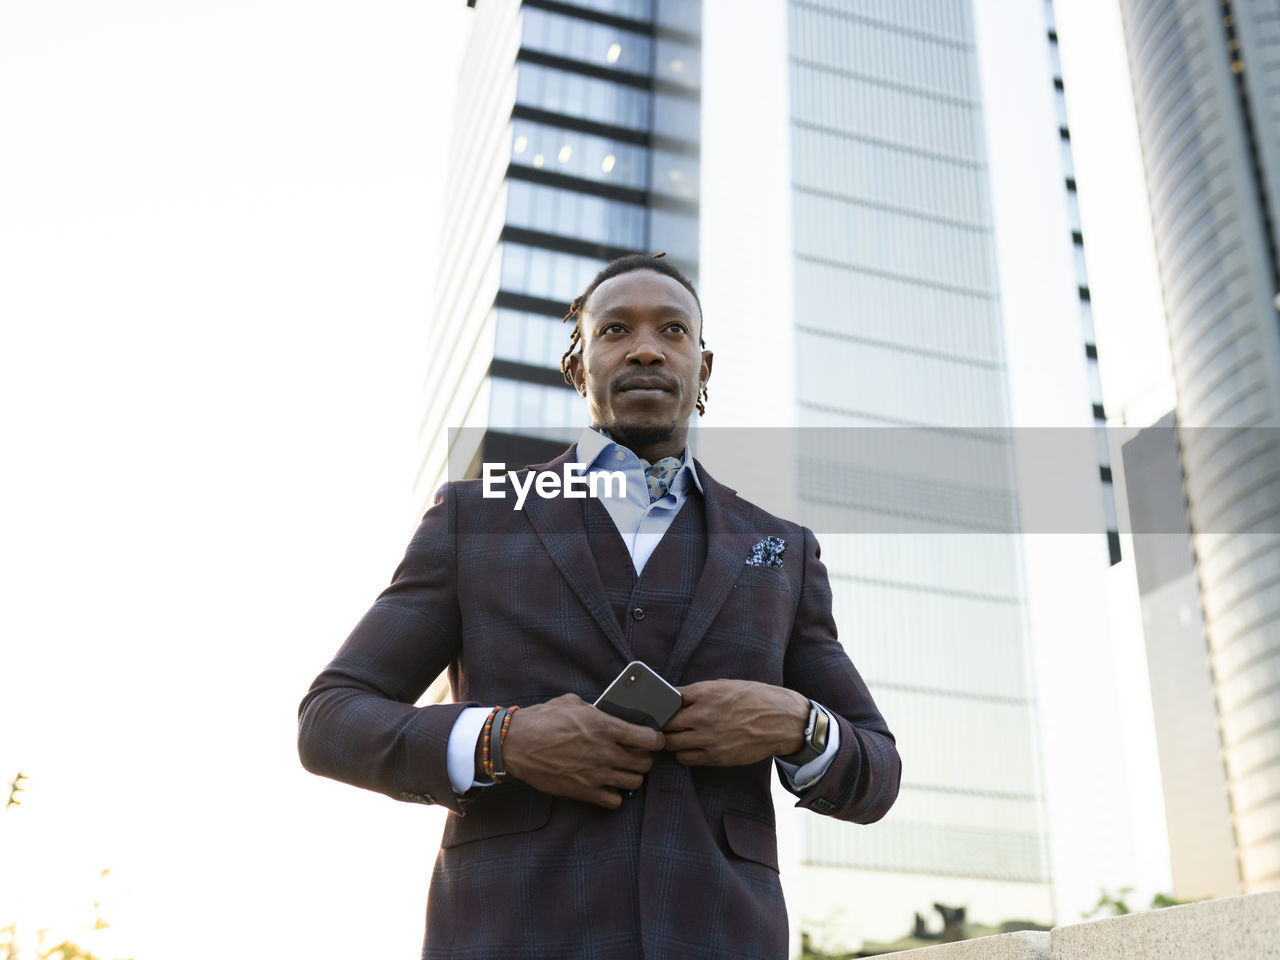 Low angle of serious african american male entrepreneur wearing classy suit standing with smartphone in hand on street in city center and looking away